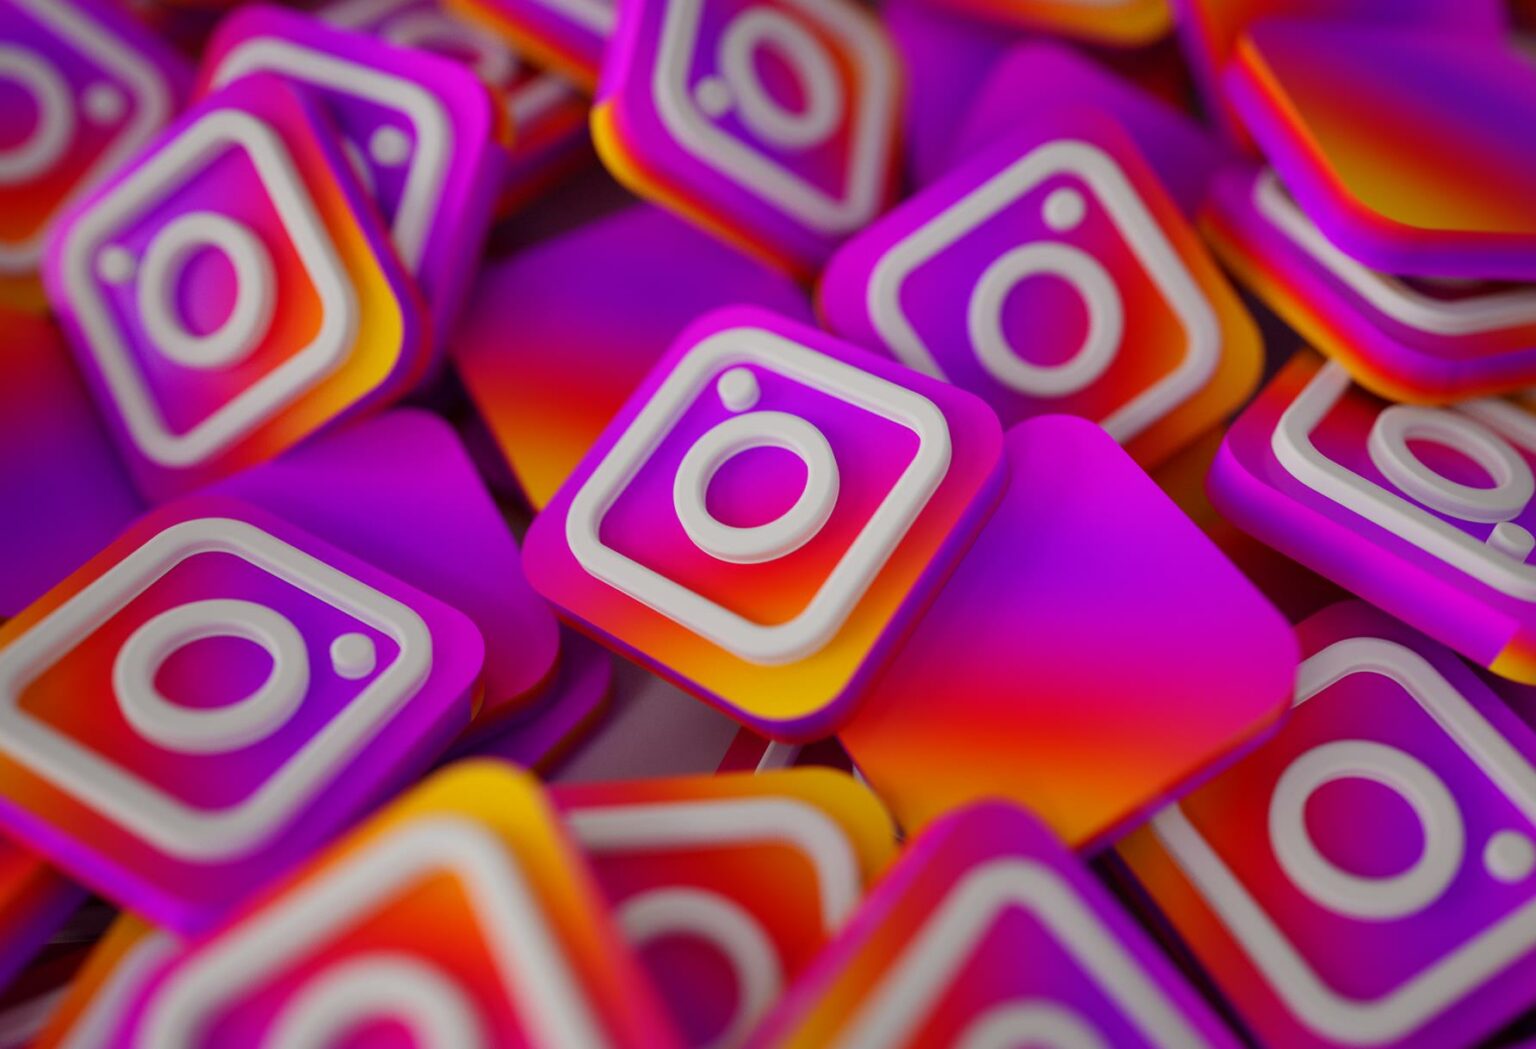 Instagram Launches NFT Function, Product Details Exposed